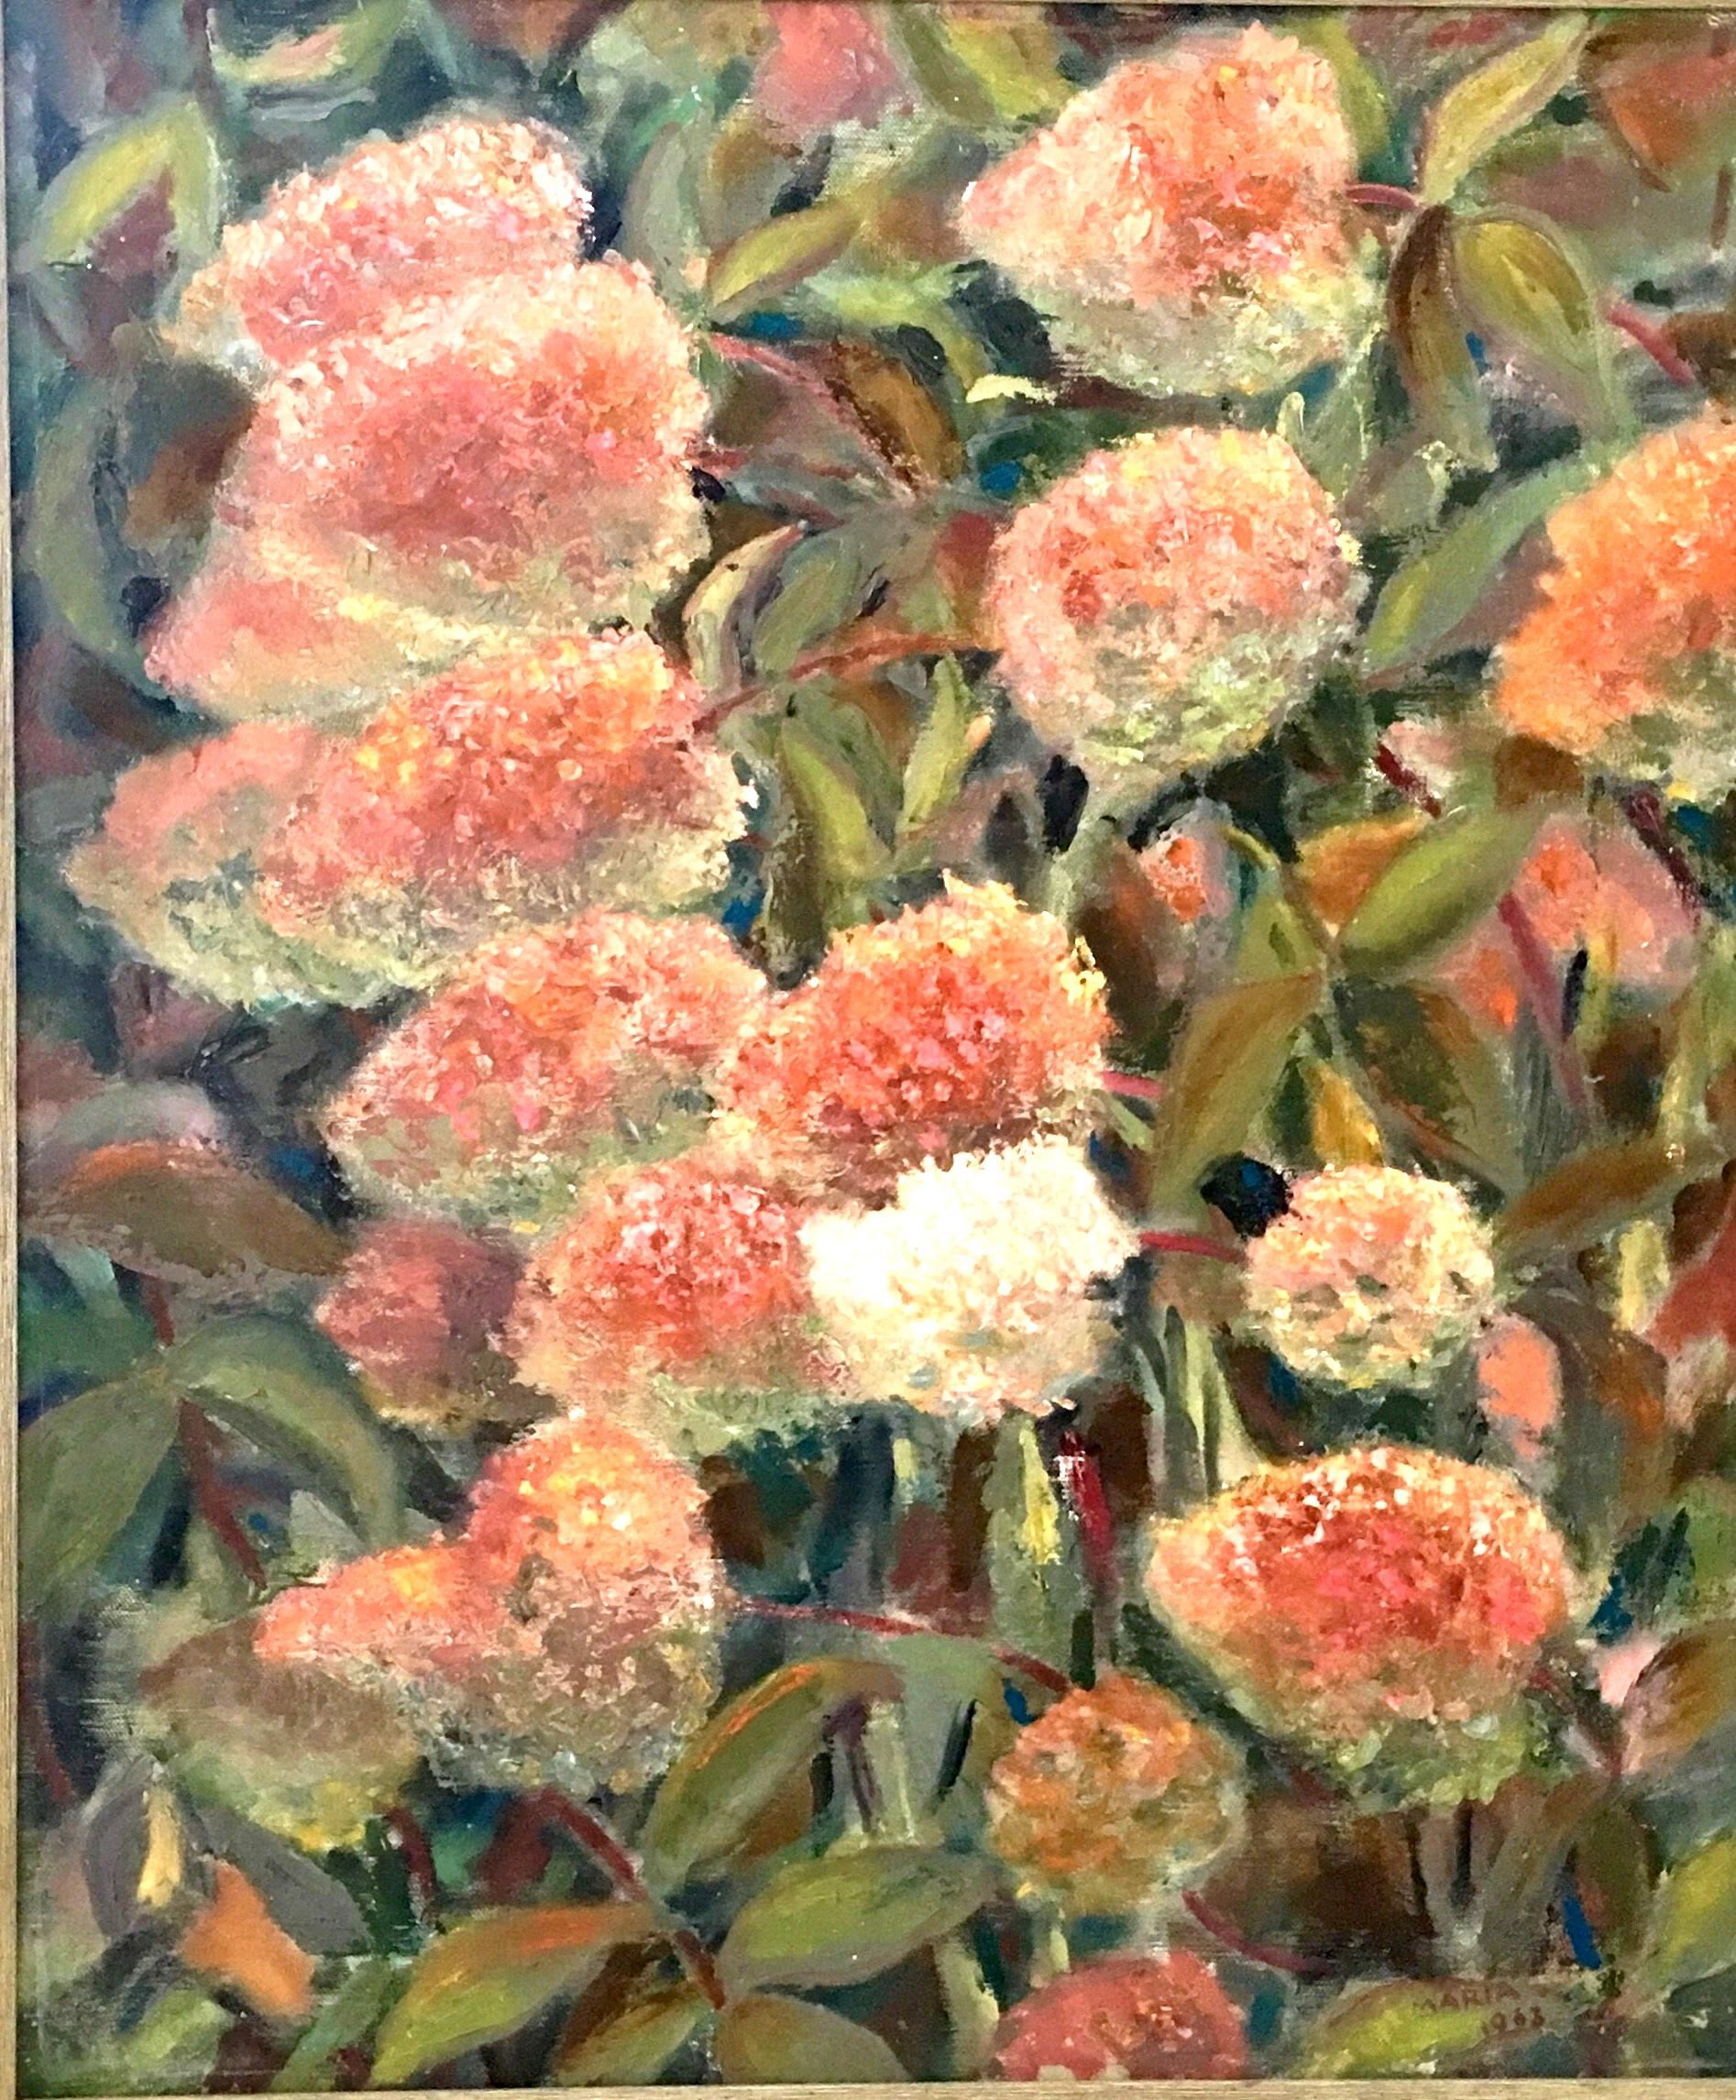 1963 original oil on canvas painting by, Maria Gerstman. This lovely and textured floral motif painting features a color palette of shades of pink and green with vivid contrasting jewel tone colors, which add incredible depth. Signed by the artist